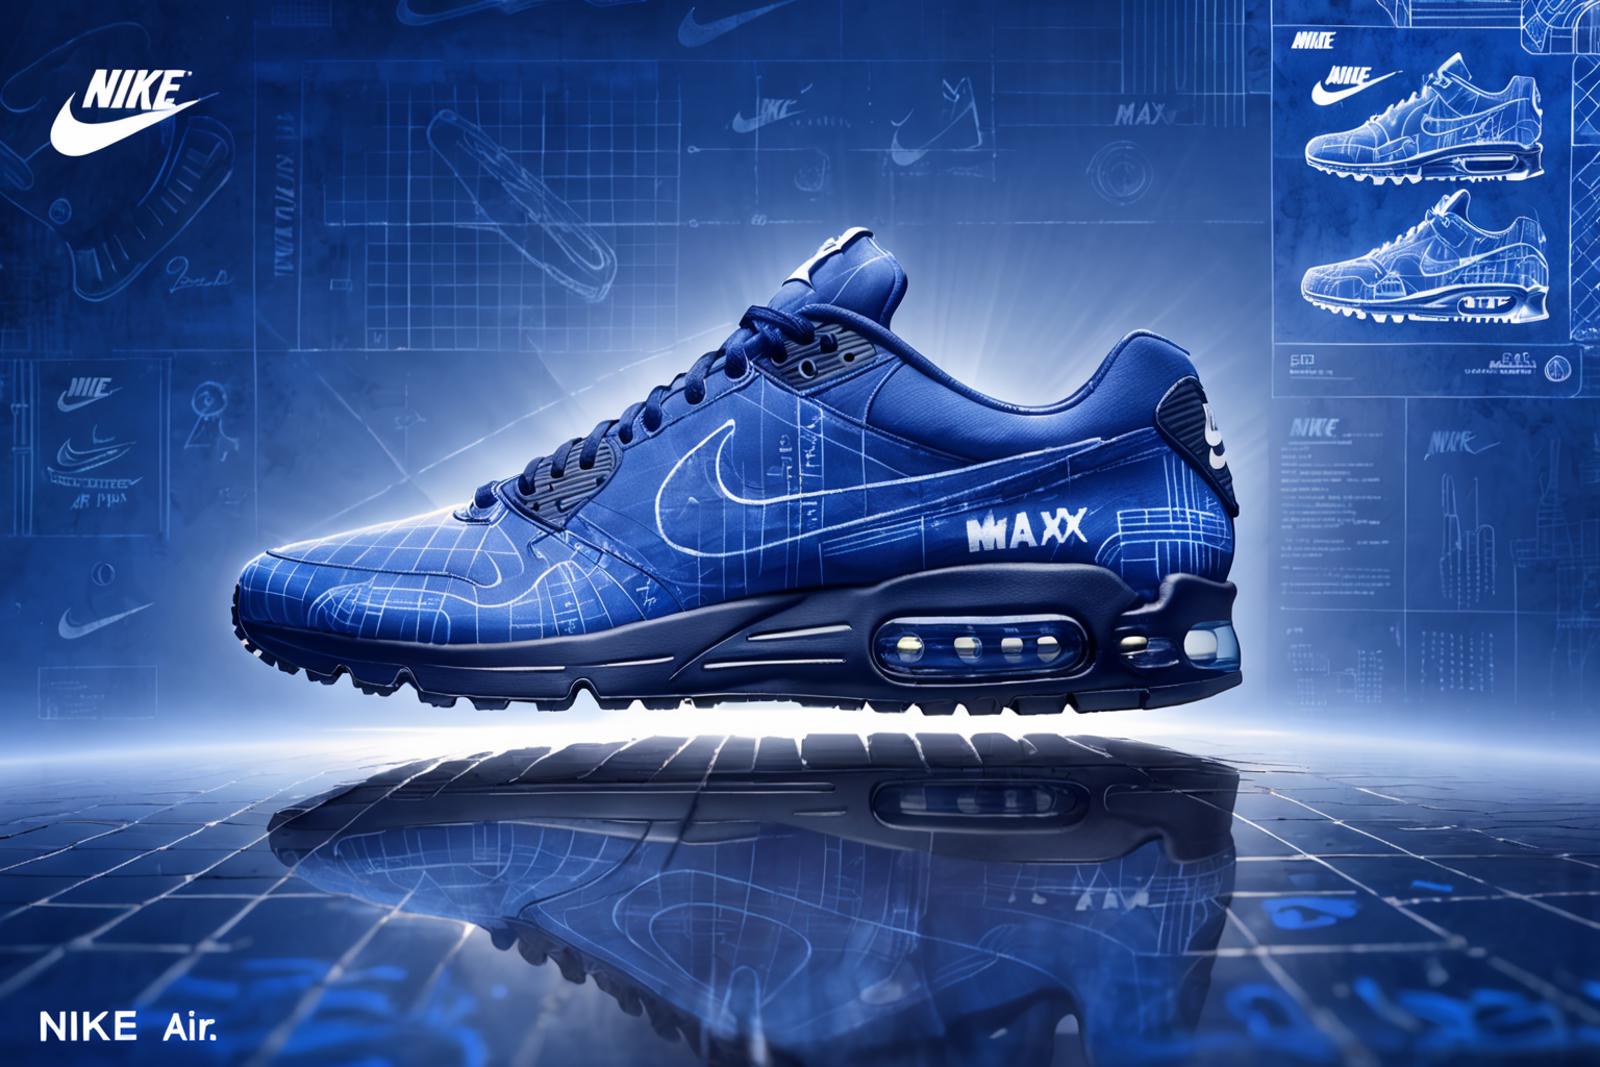 Blue Nike Air Max shoes with a black and gray sole.